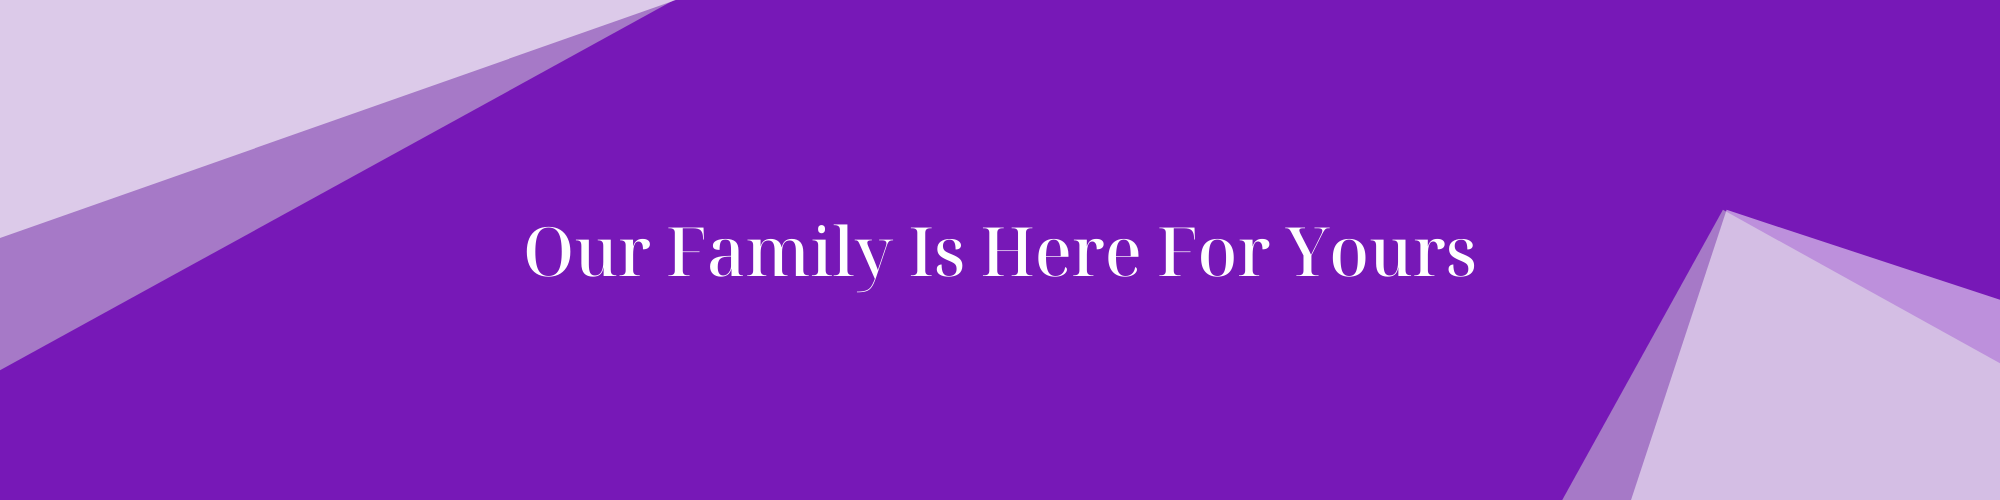 Our Family Is Here For Yours.